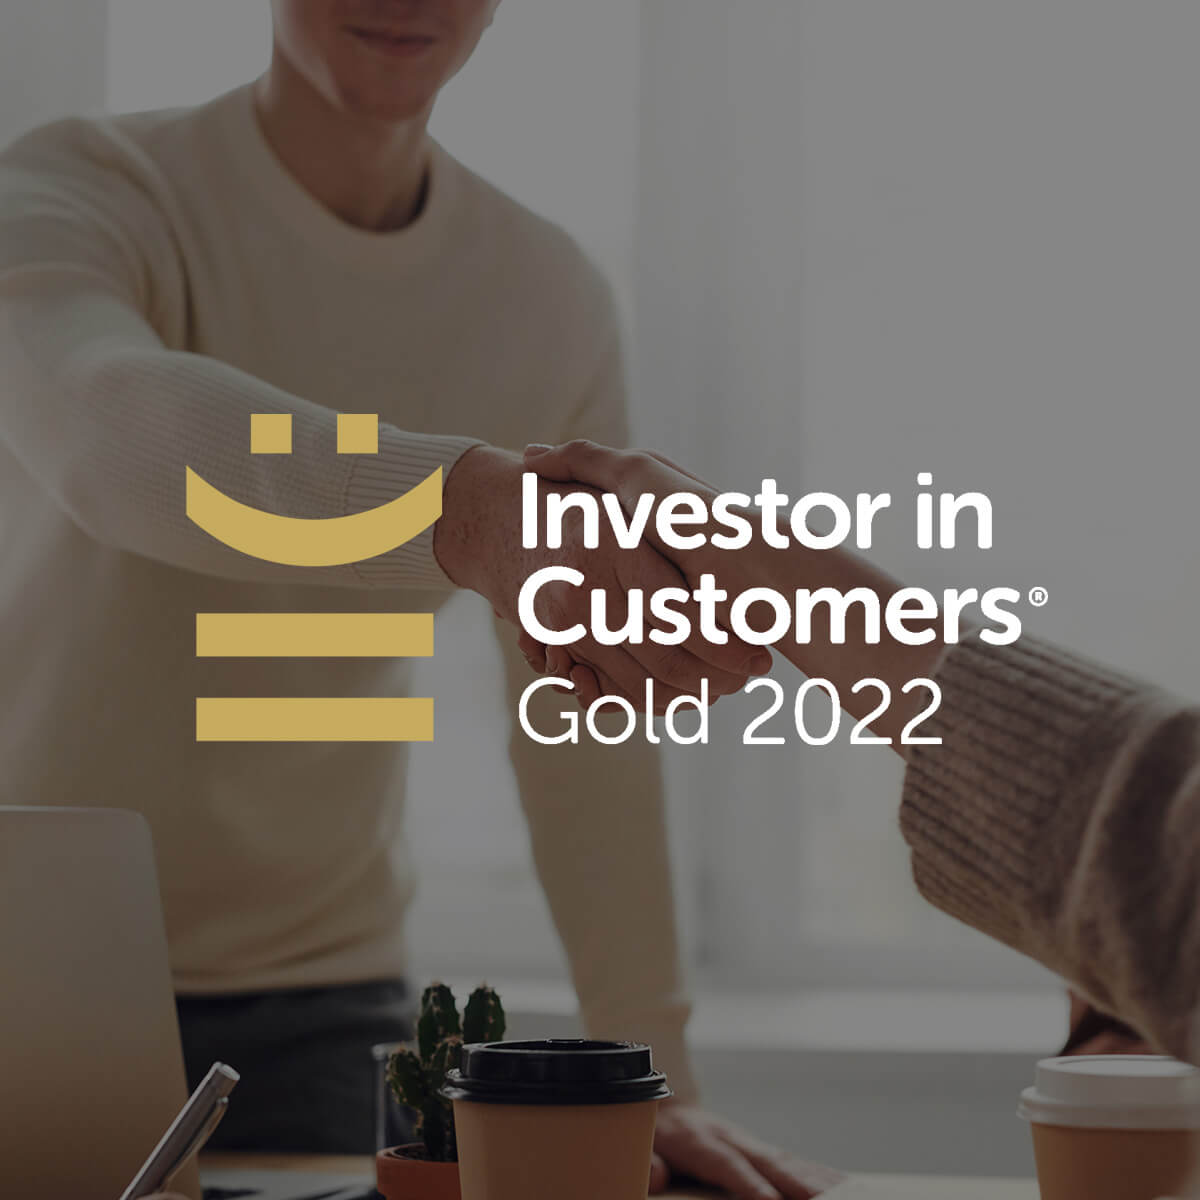 Investor in Customers Gold 2022